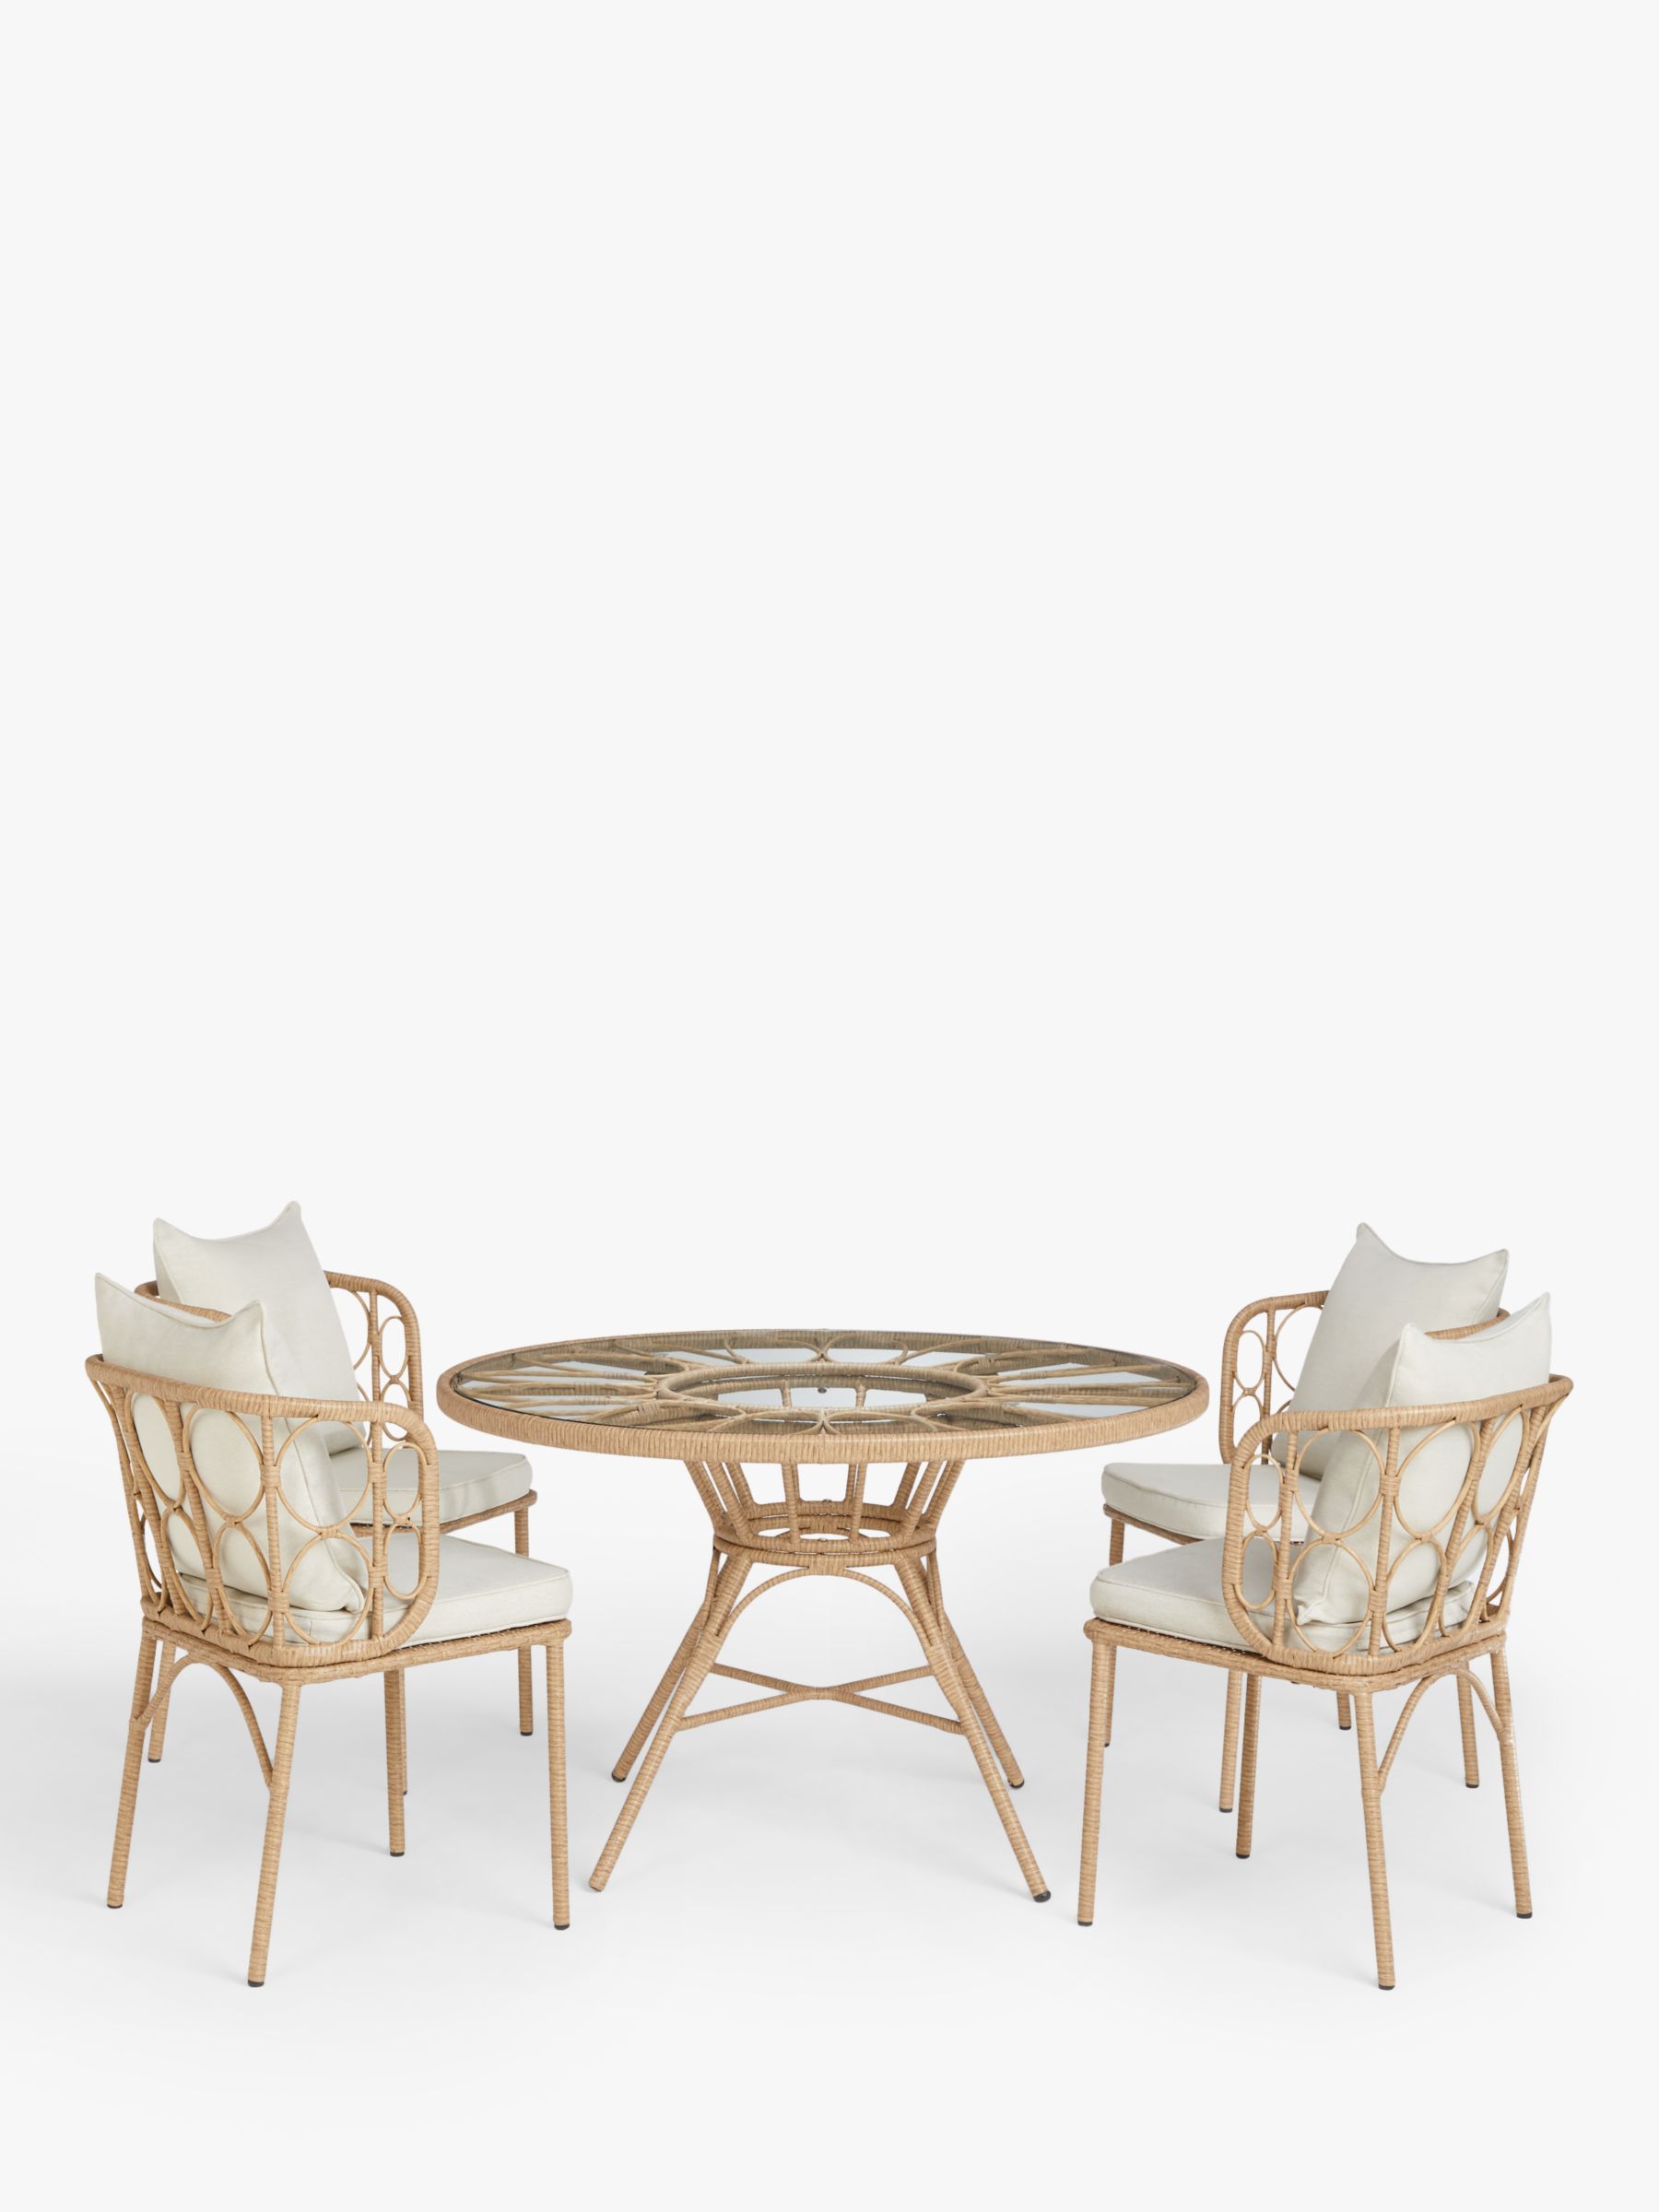 John Lewis Infinity Cane 4-Seater Round Garden Dining Table & Chairs Set, Natural